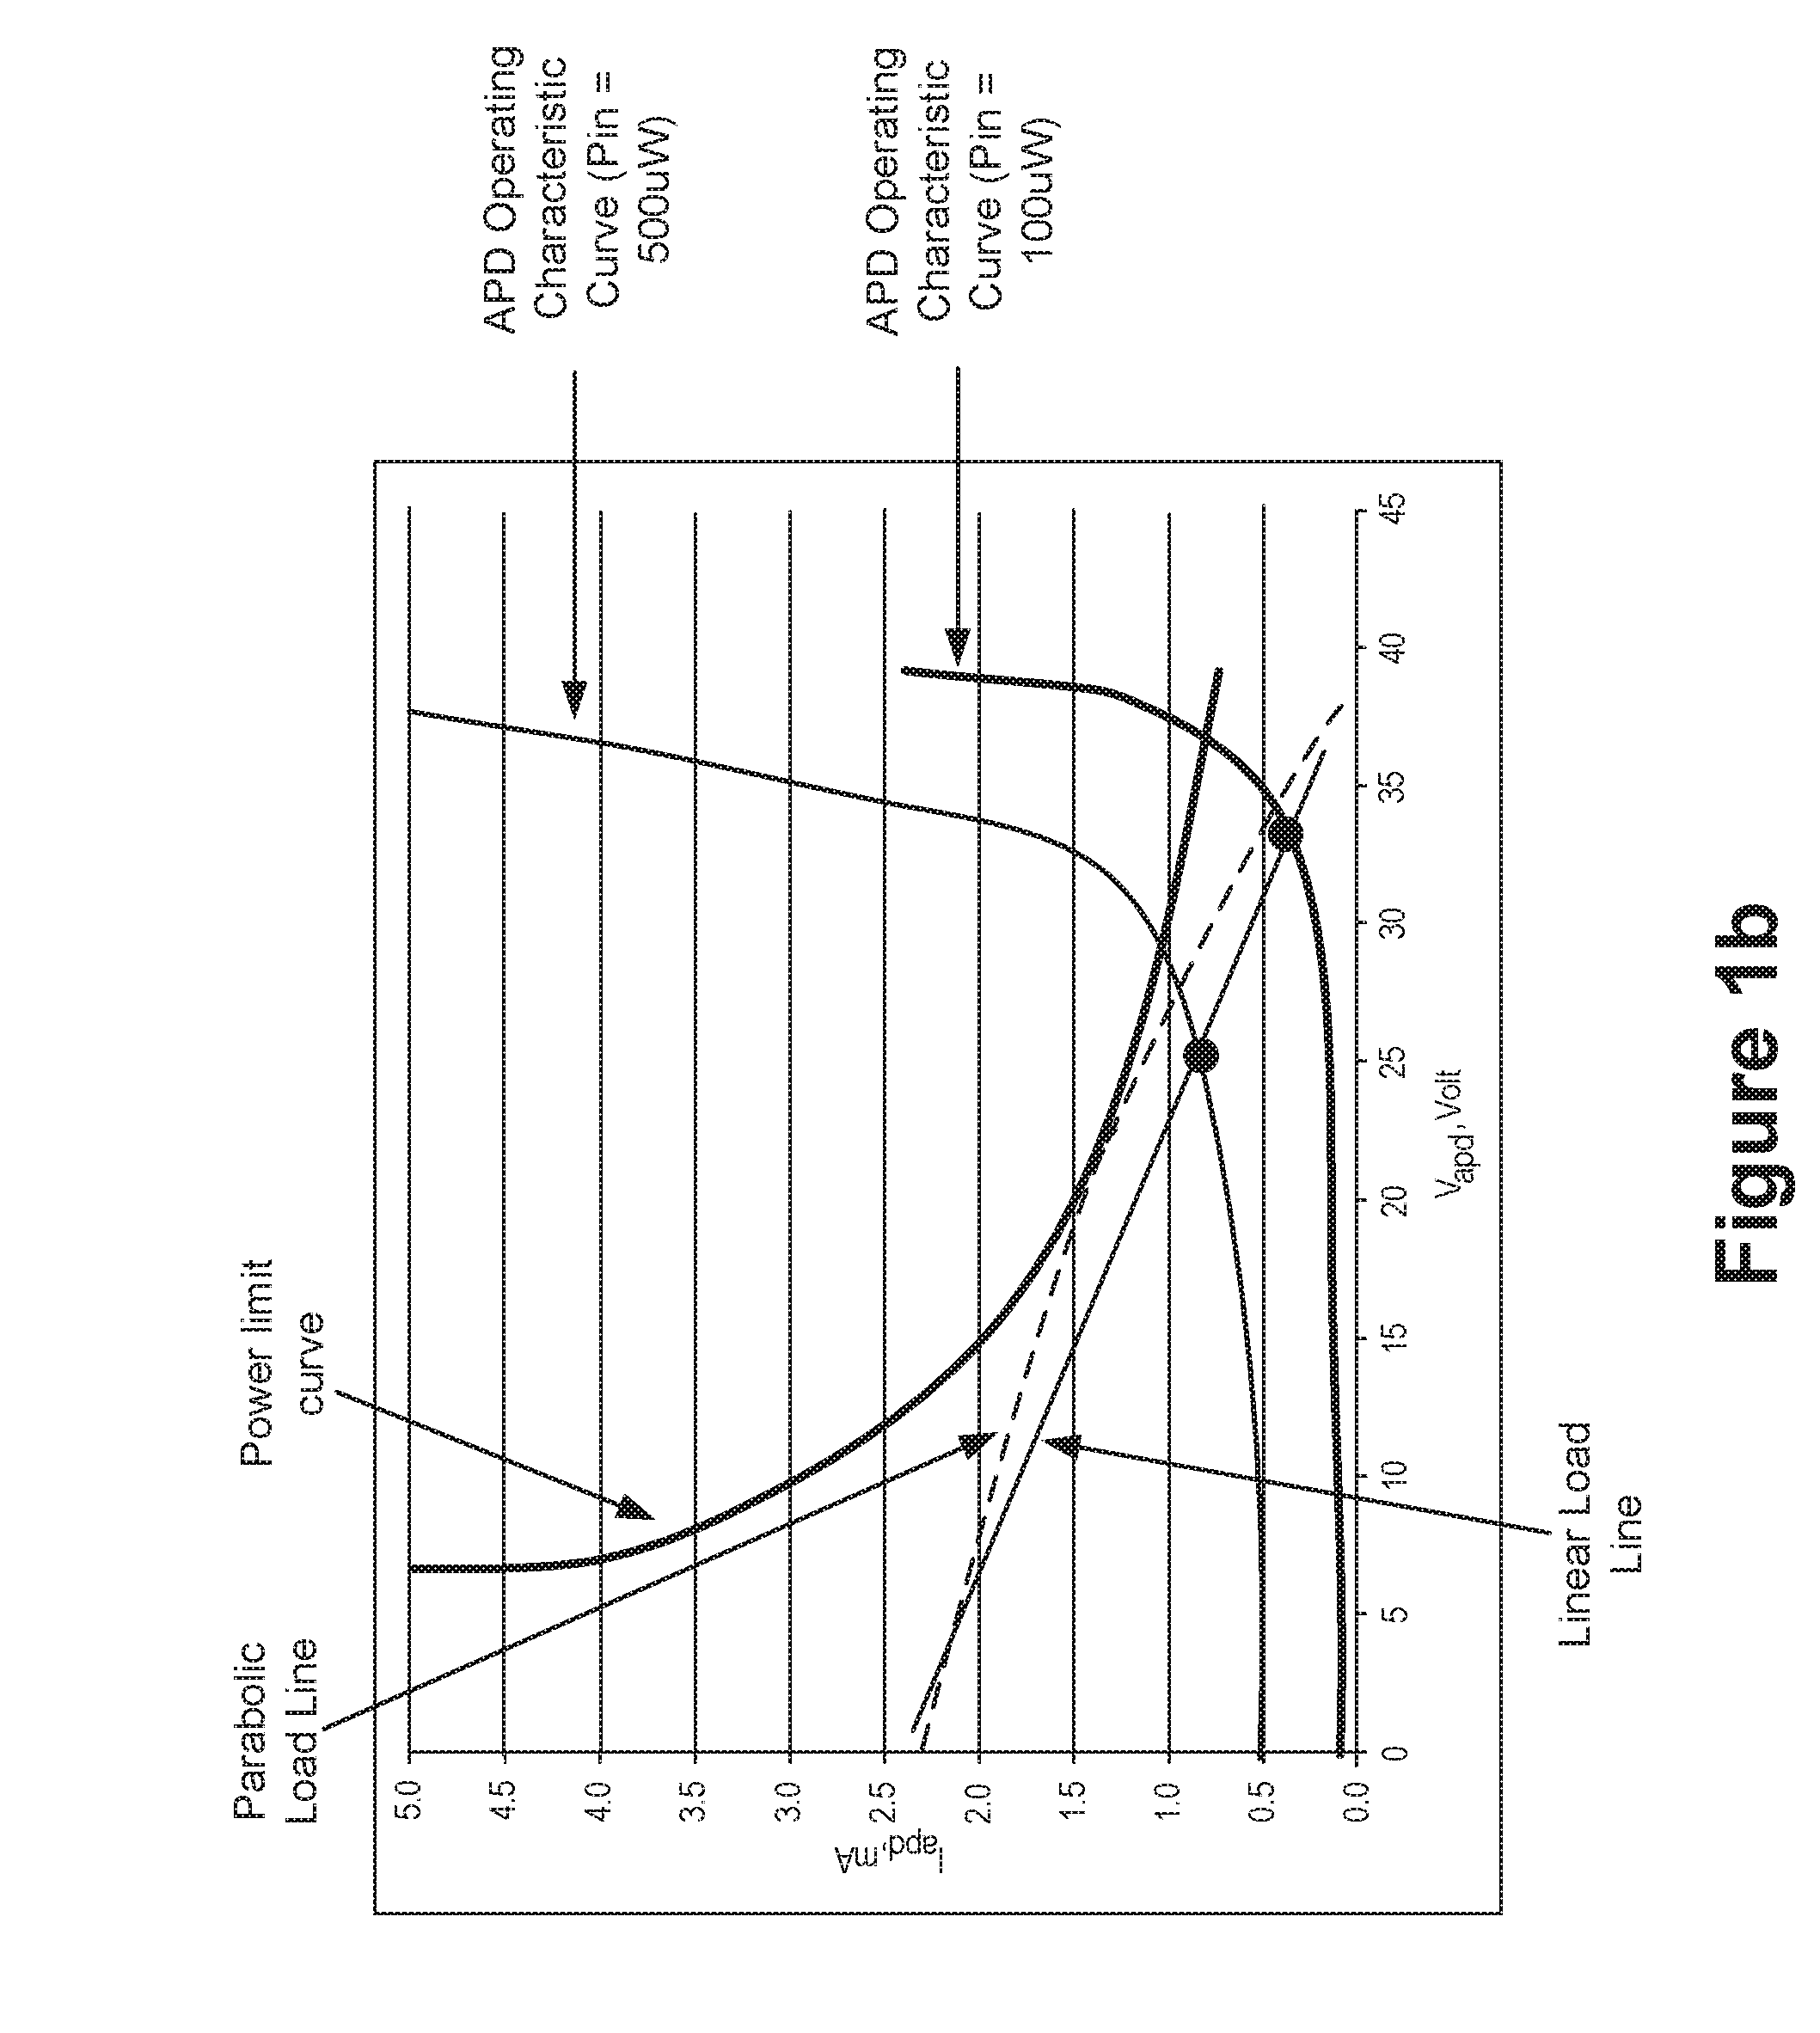 Low-power APD bias controller, bias control method, and photoelectric receiver